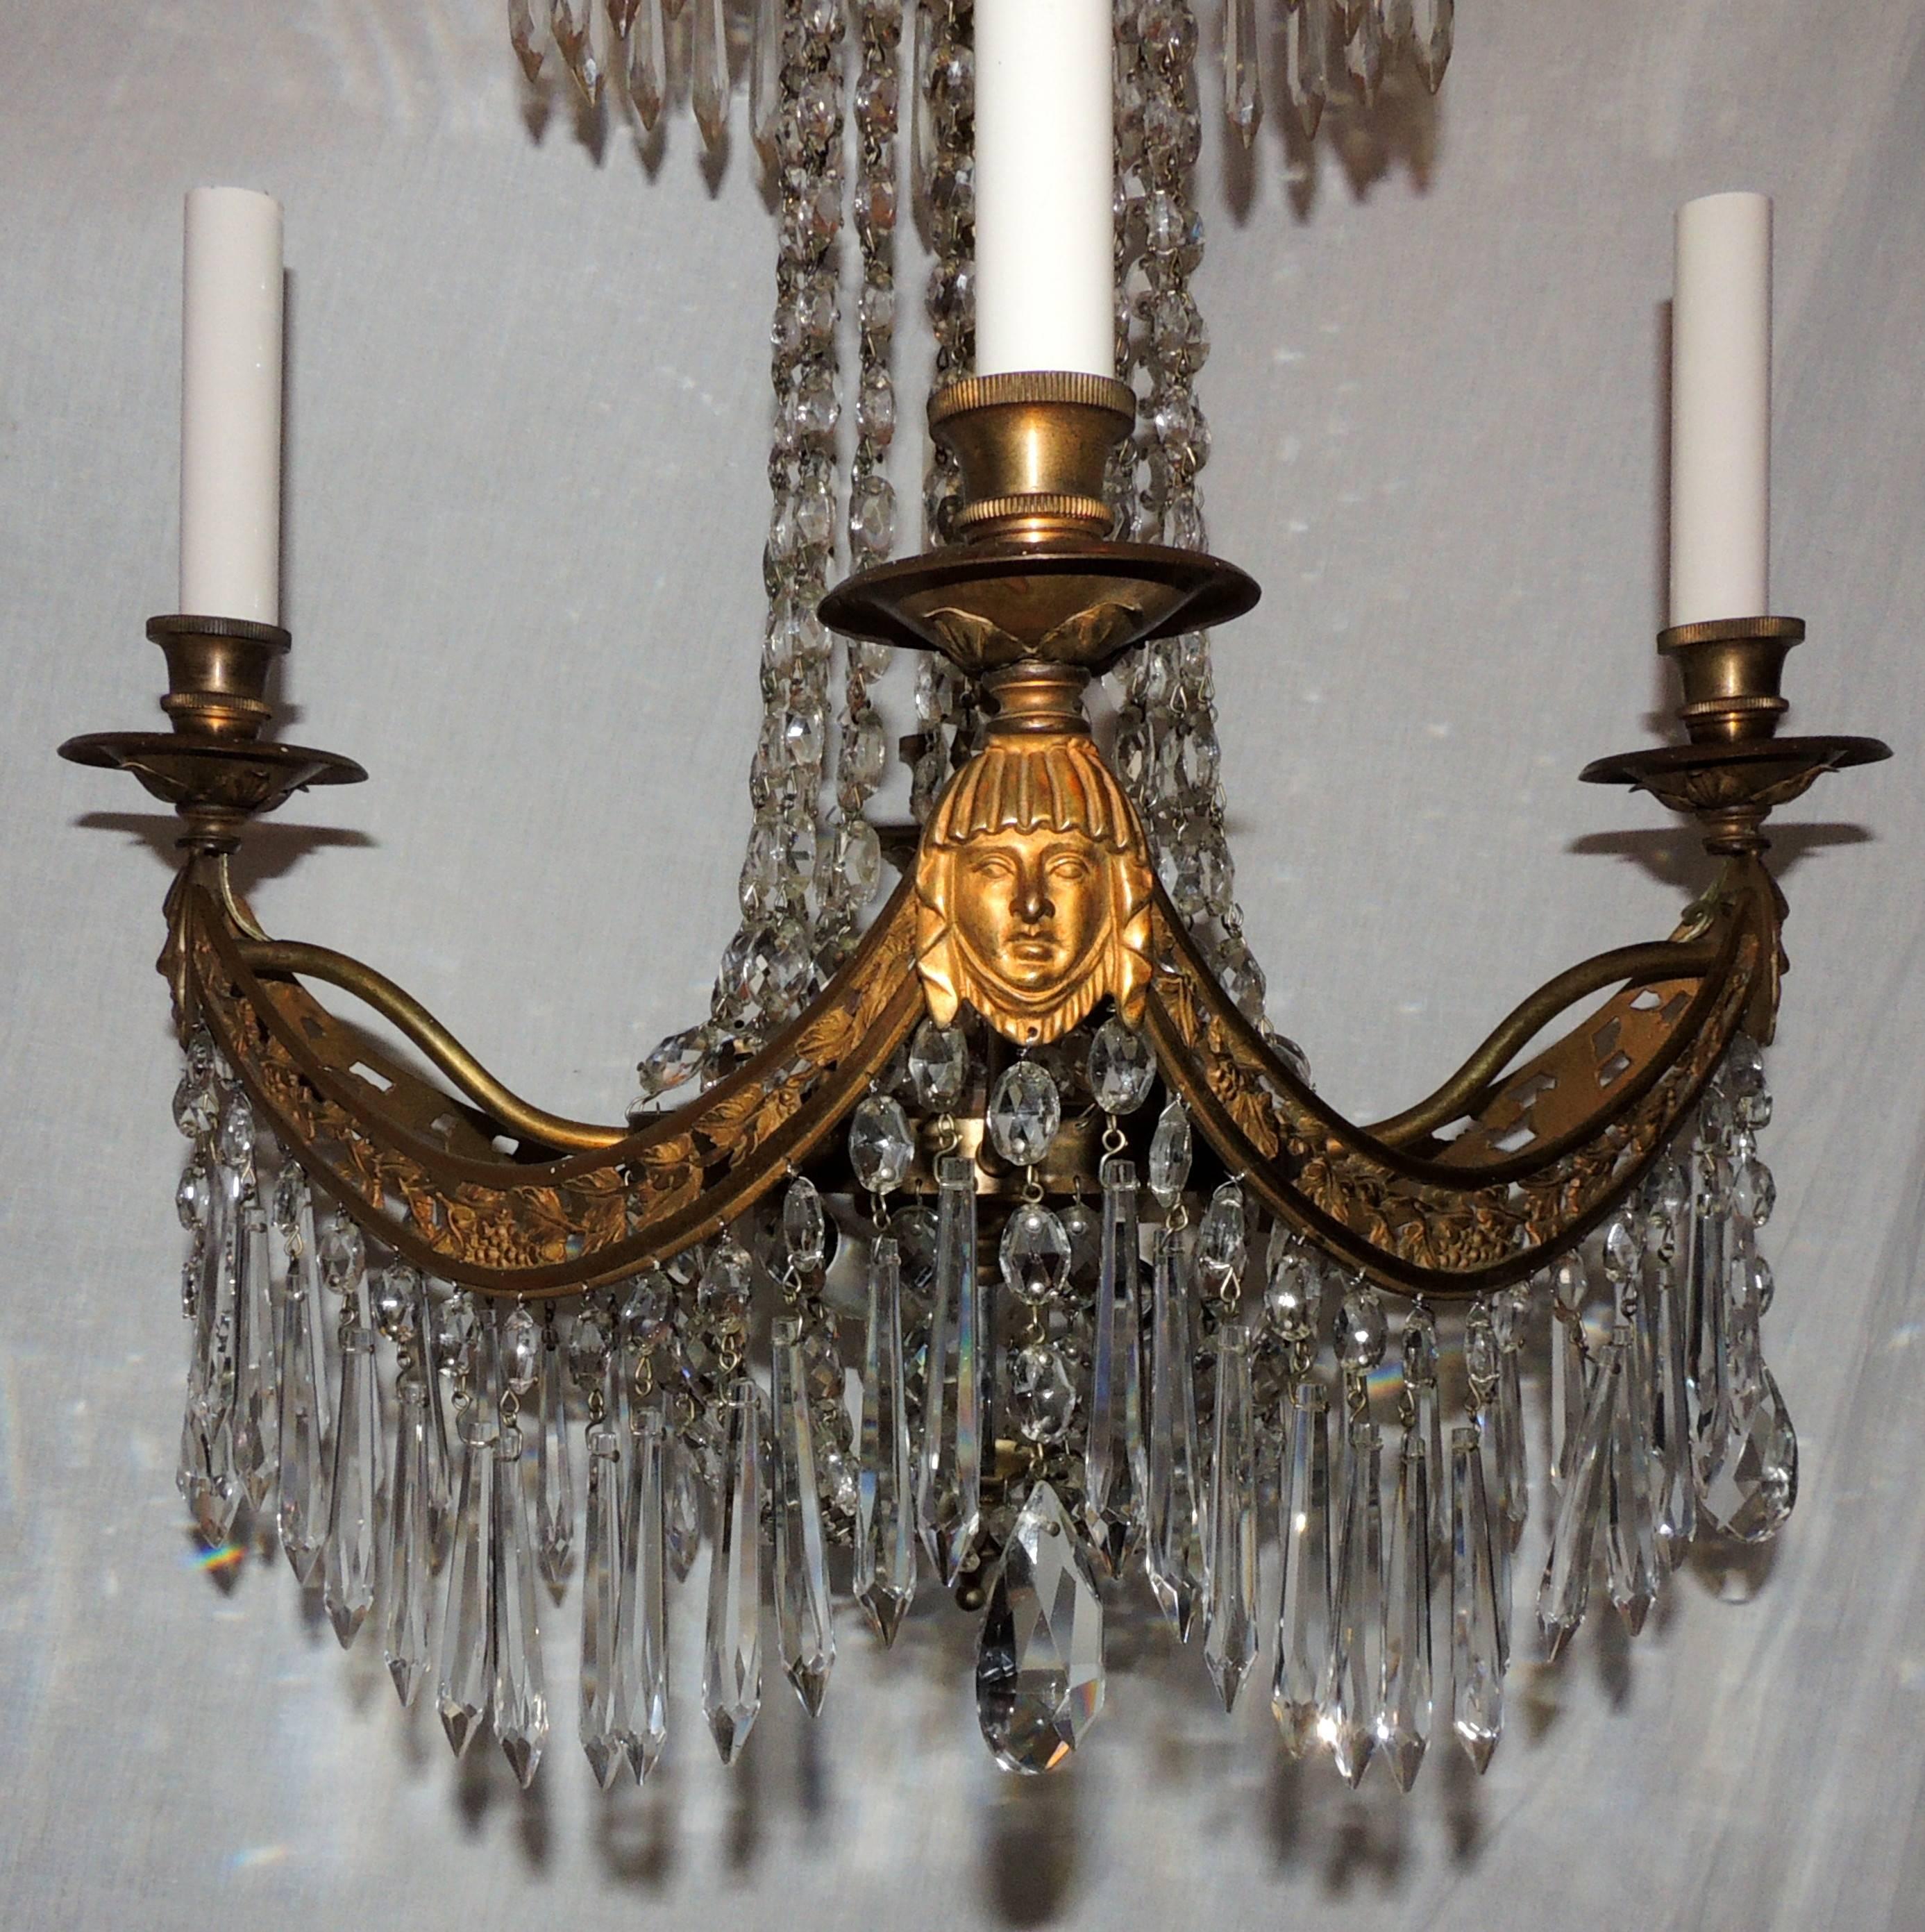 A Very Fine French Bronze Pierced Filigree & Maiden Mask Neoclassical / Baltic Empire Crystal  Swag Basket Chandelier In A Square Form With 4 Lights Around The Frame And 4 Lights On The Interior. 